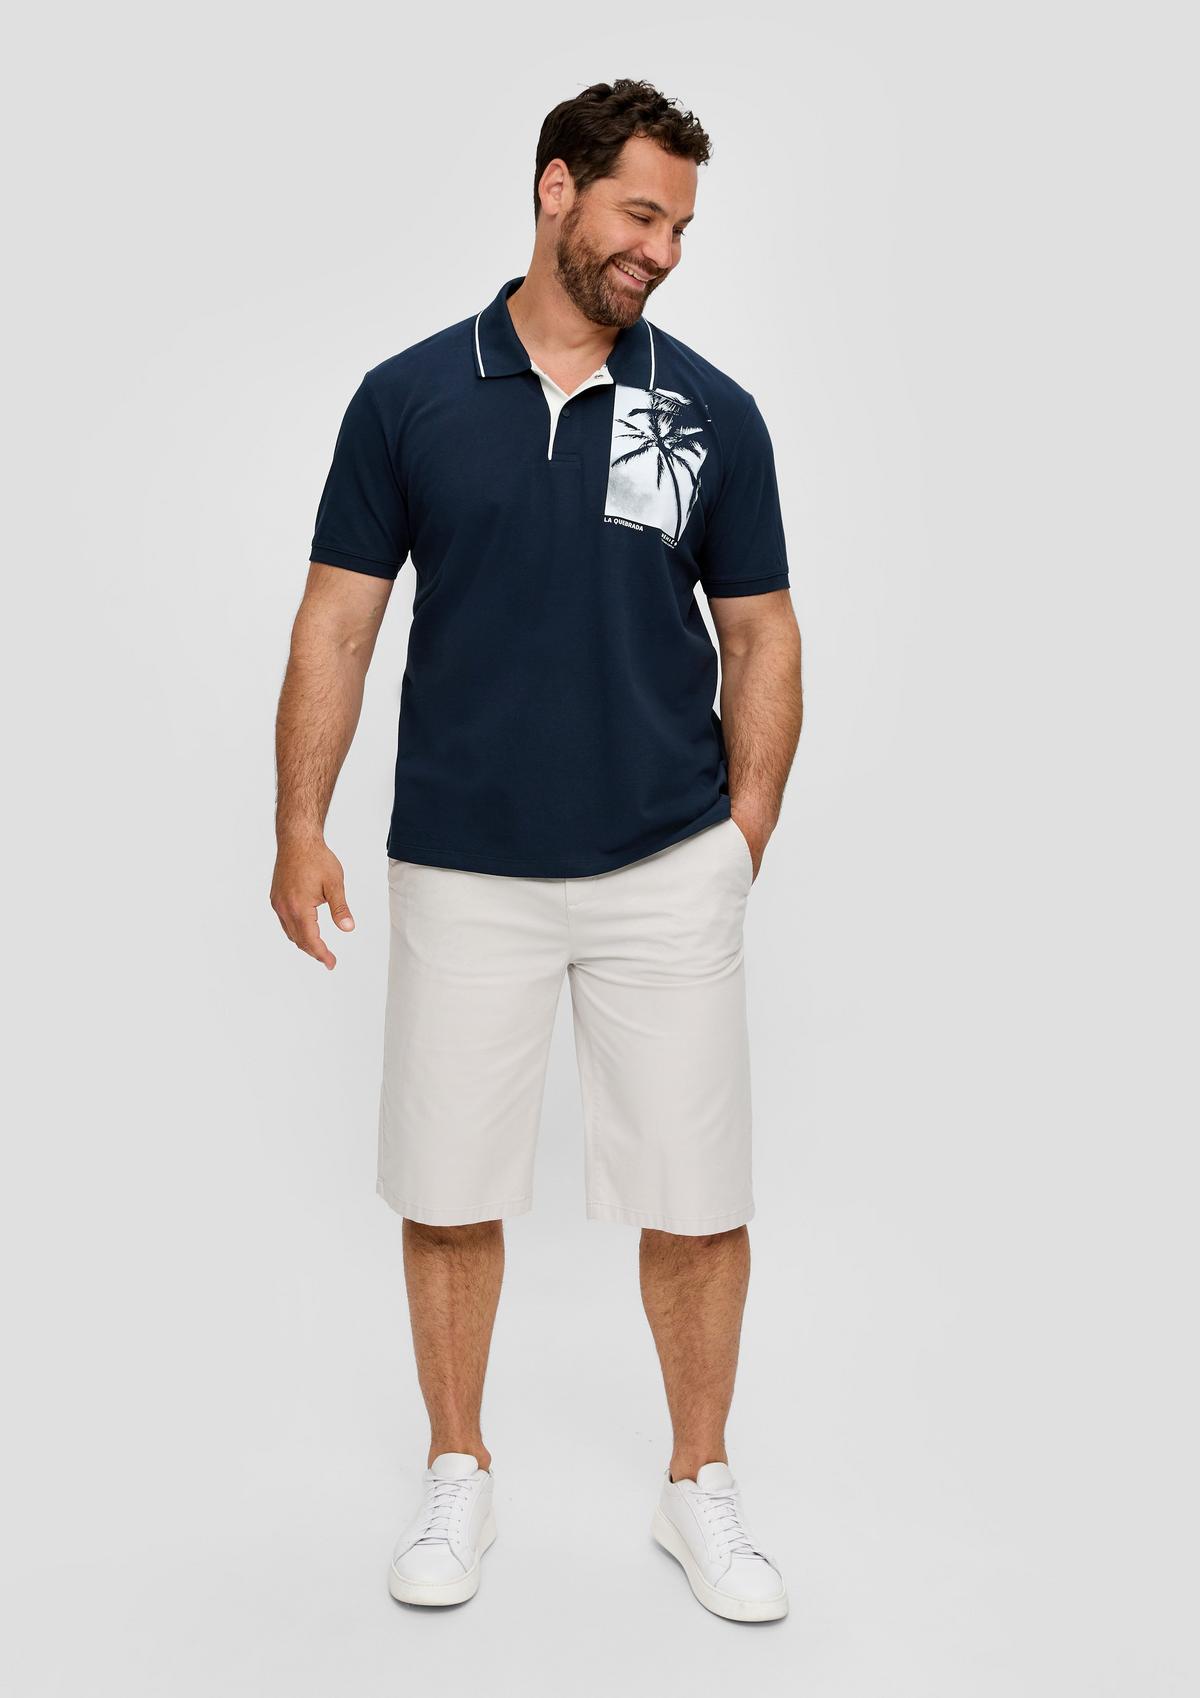 s.Oliver Polo shirt with a front print